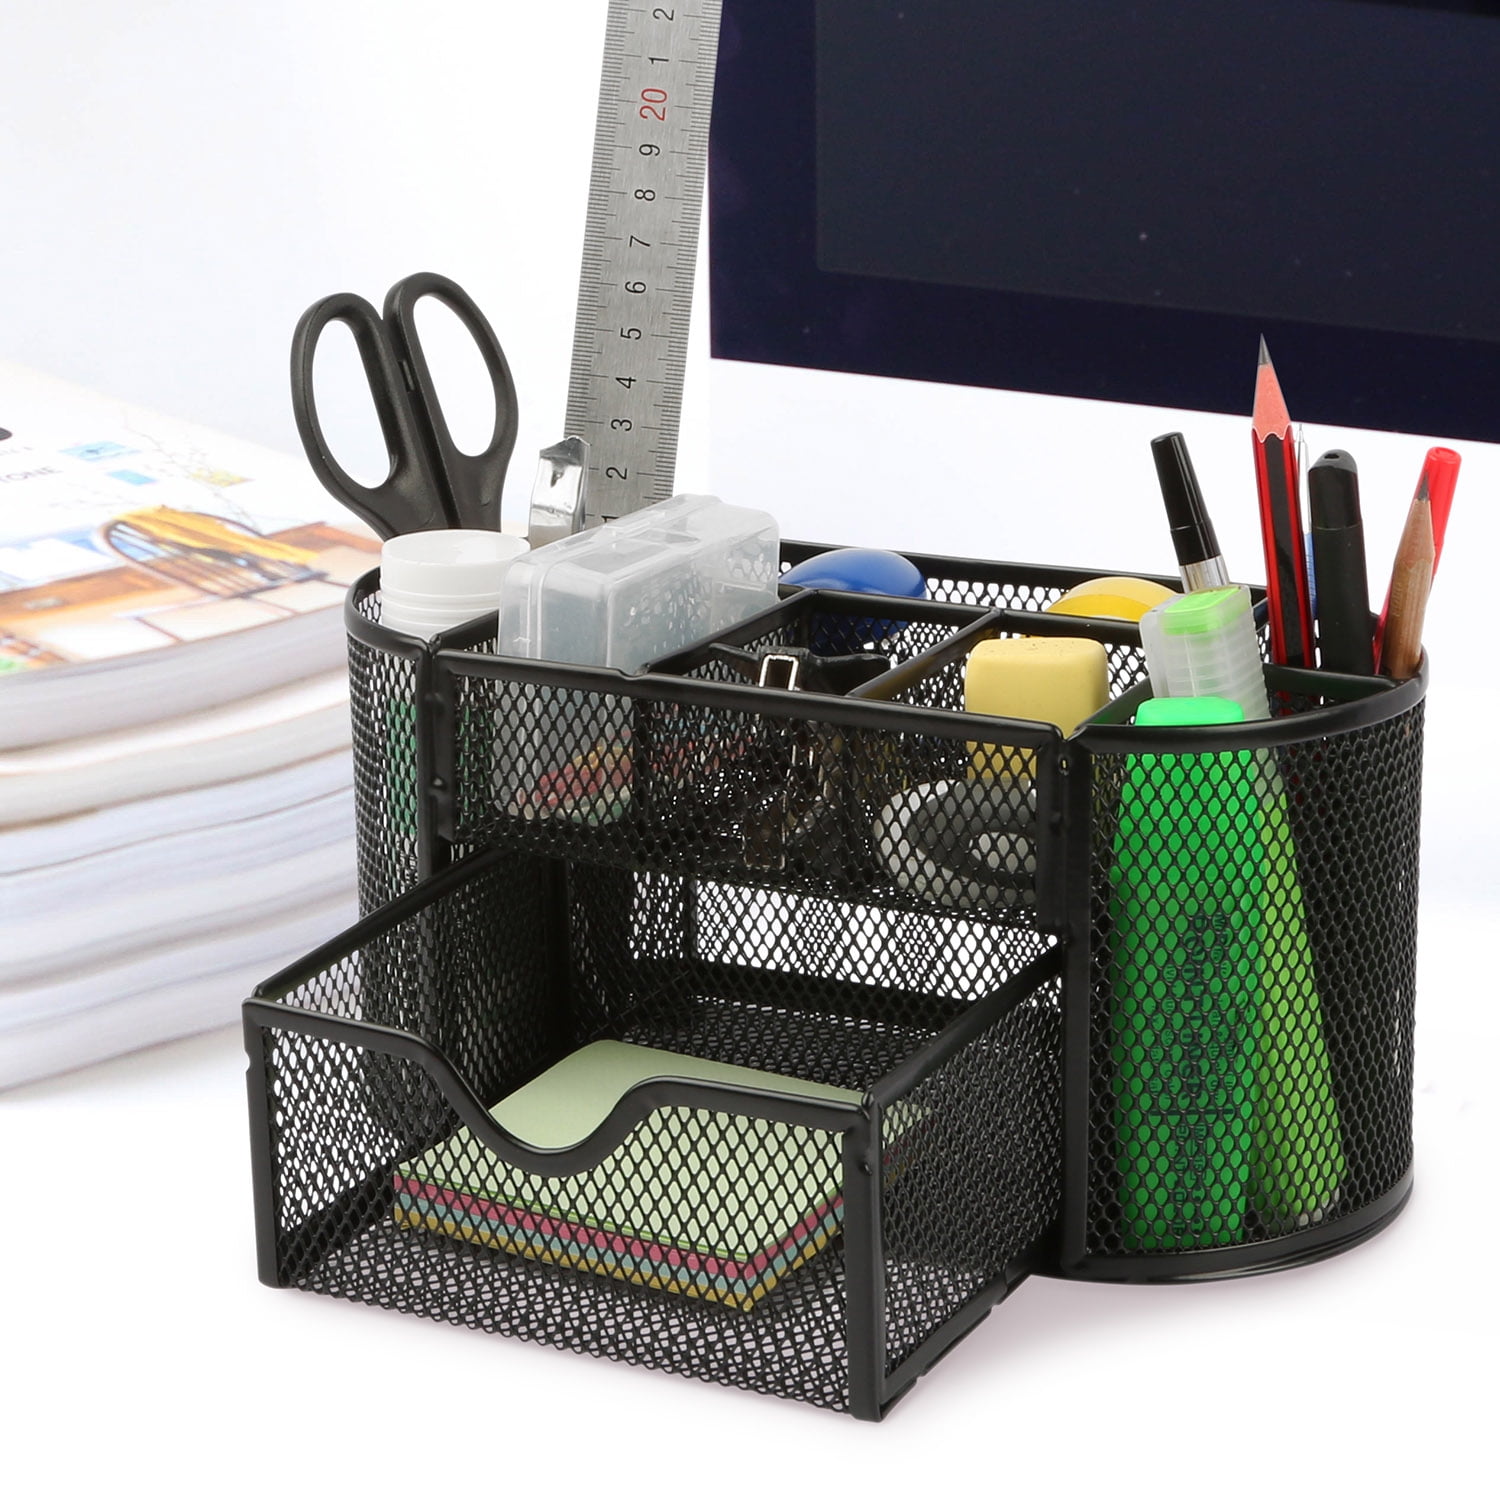 Multi-Functional Large Size Desk Pencil Organizer Green Pen/Pencil Marker Holder Storage Box for Office School Home Supply